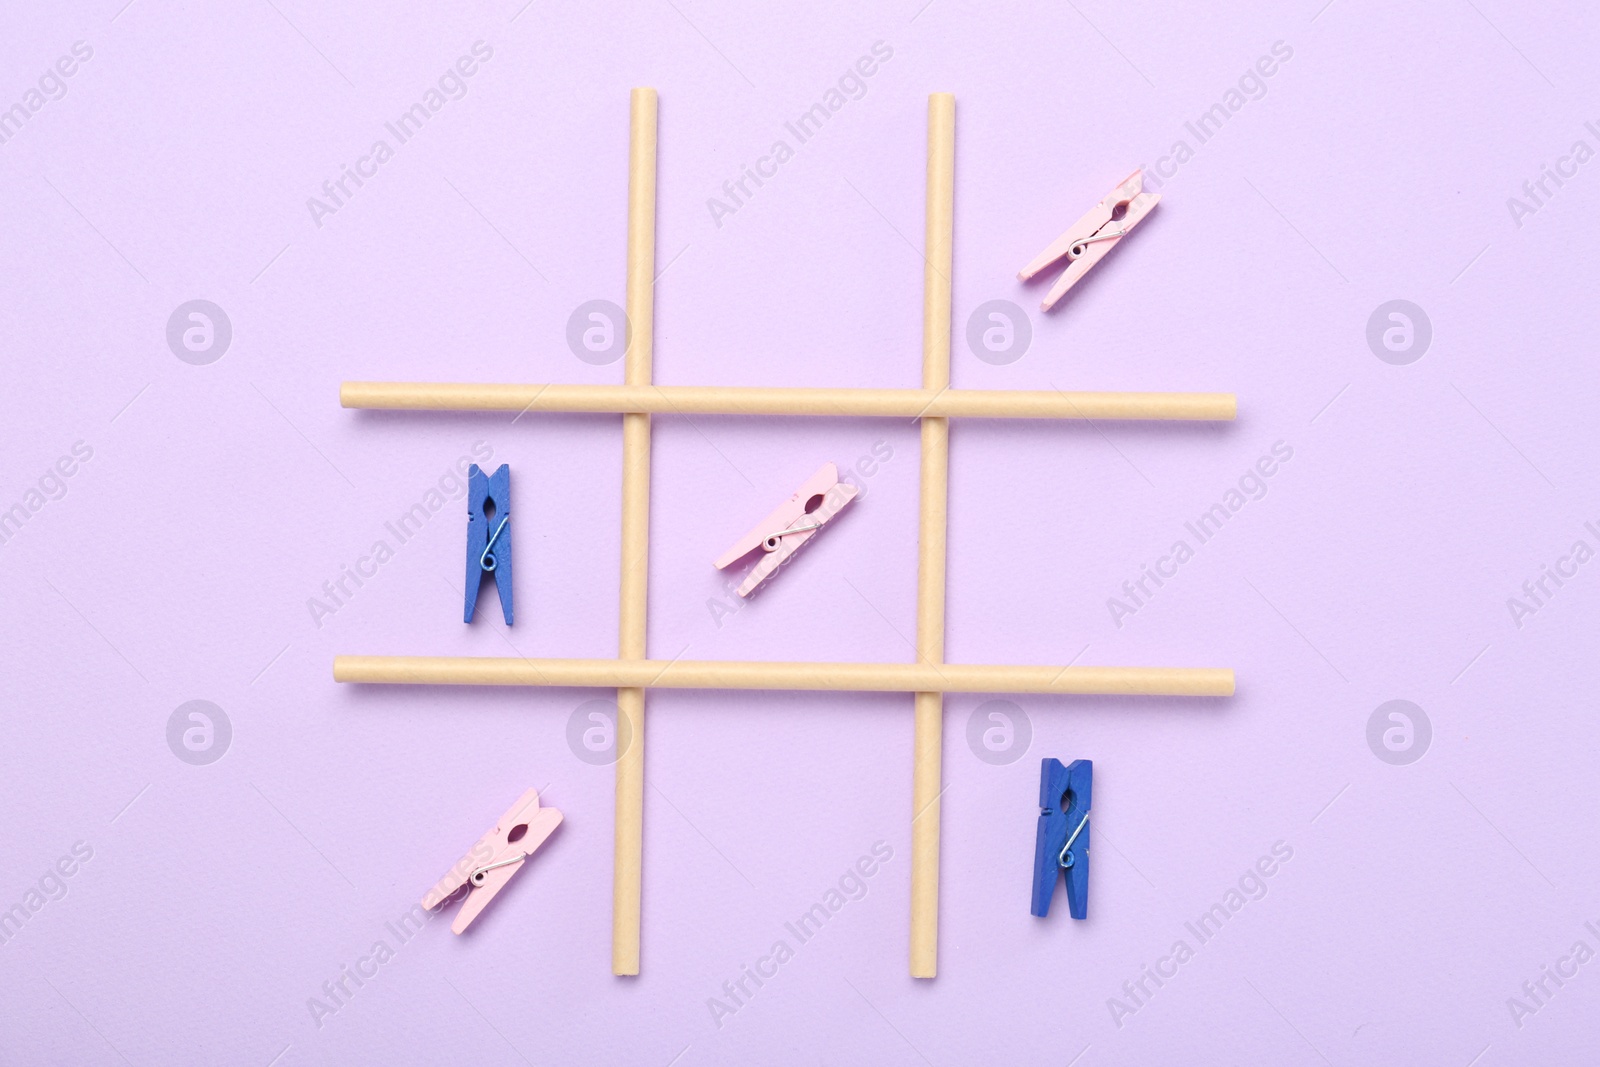 Photo of Tic tac toe game made with clothespins on violet background, top view